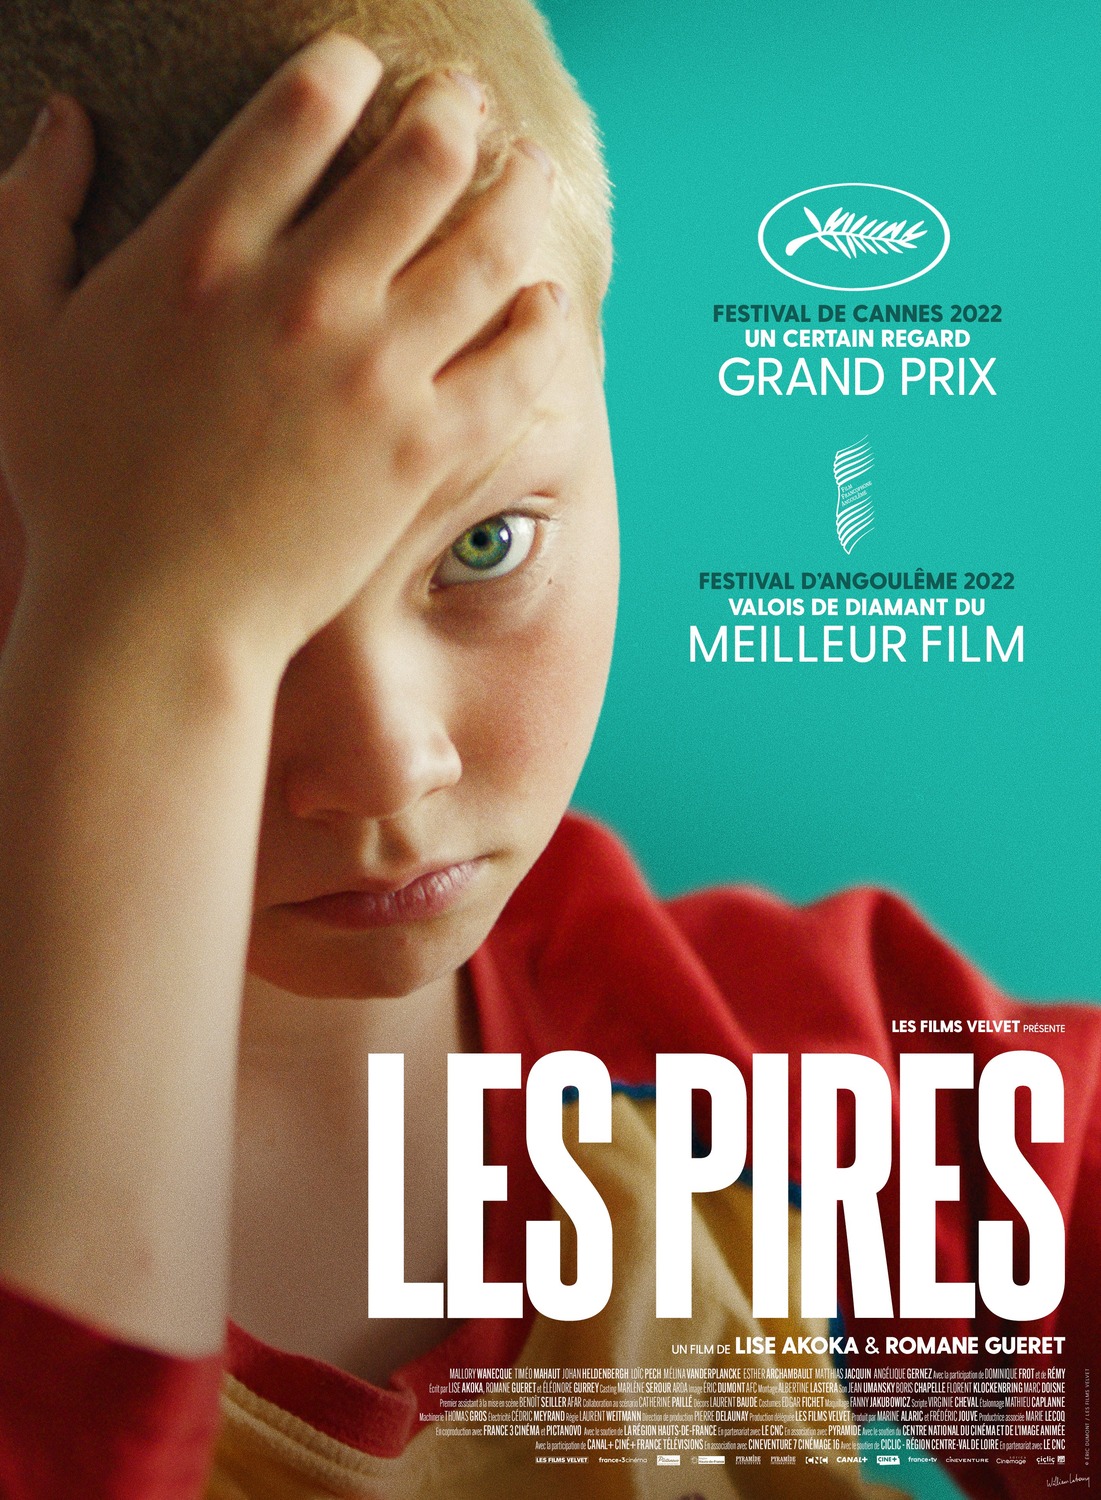 Extra Large Movie Poster Image for Les pires 